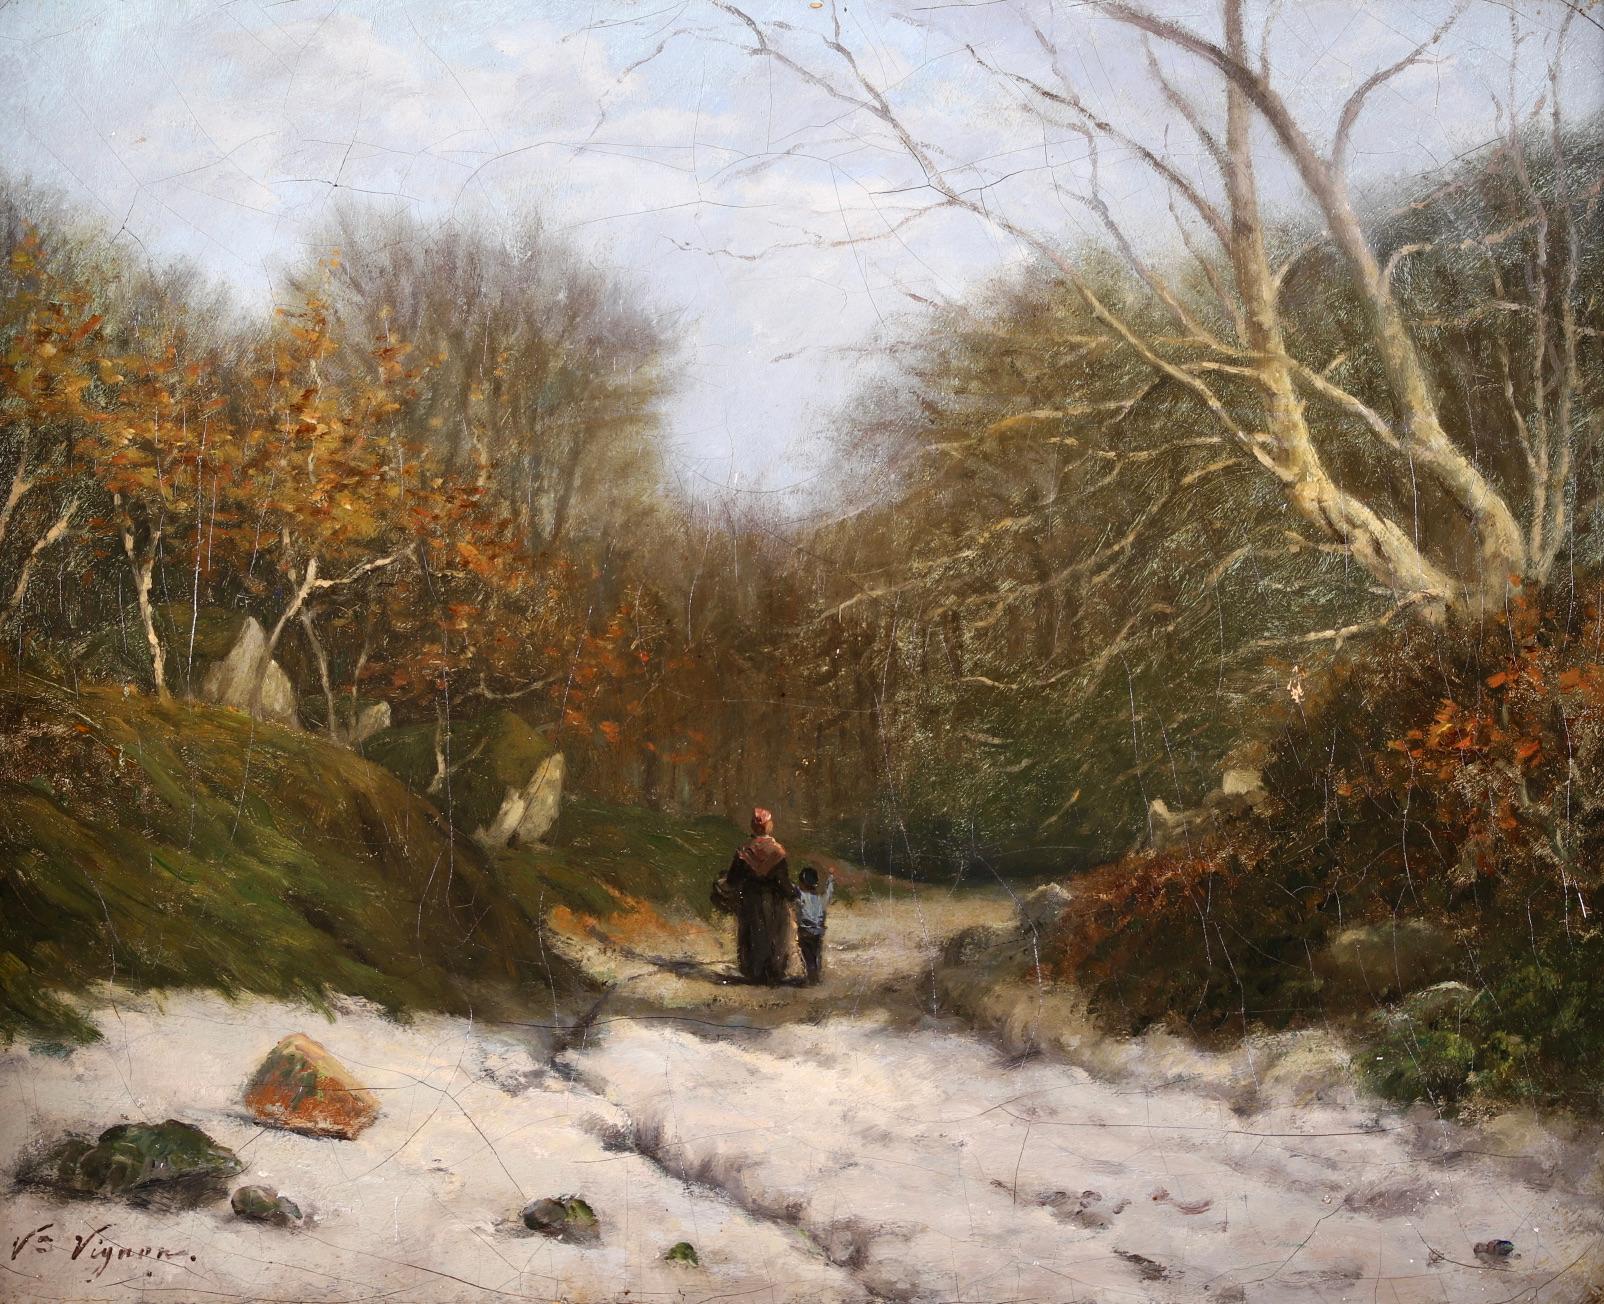 Winter - Fontainbleau Forest - Impressionist Oil, Landscape by Victor Vignon - Painting by Victor Alfred Paul Vignon